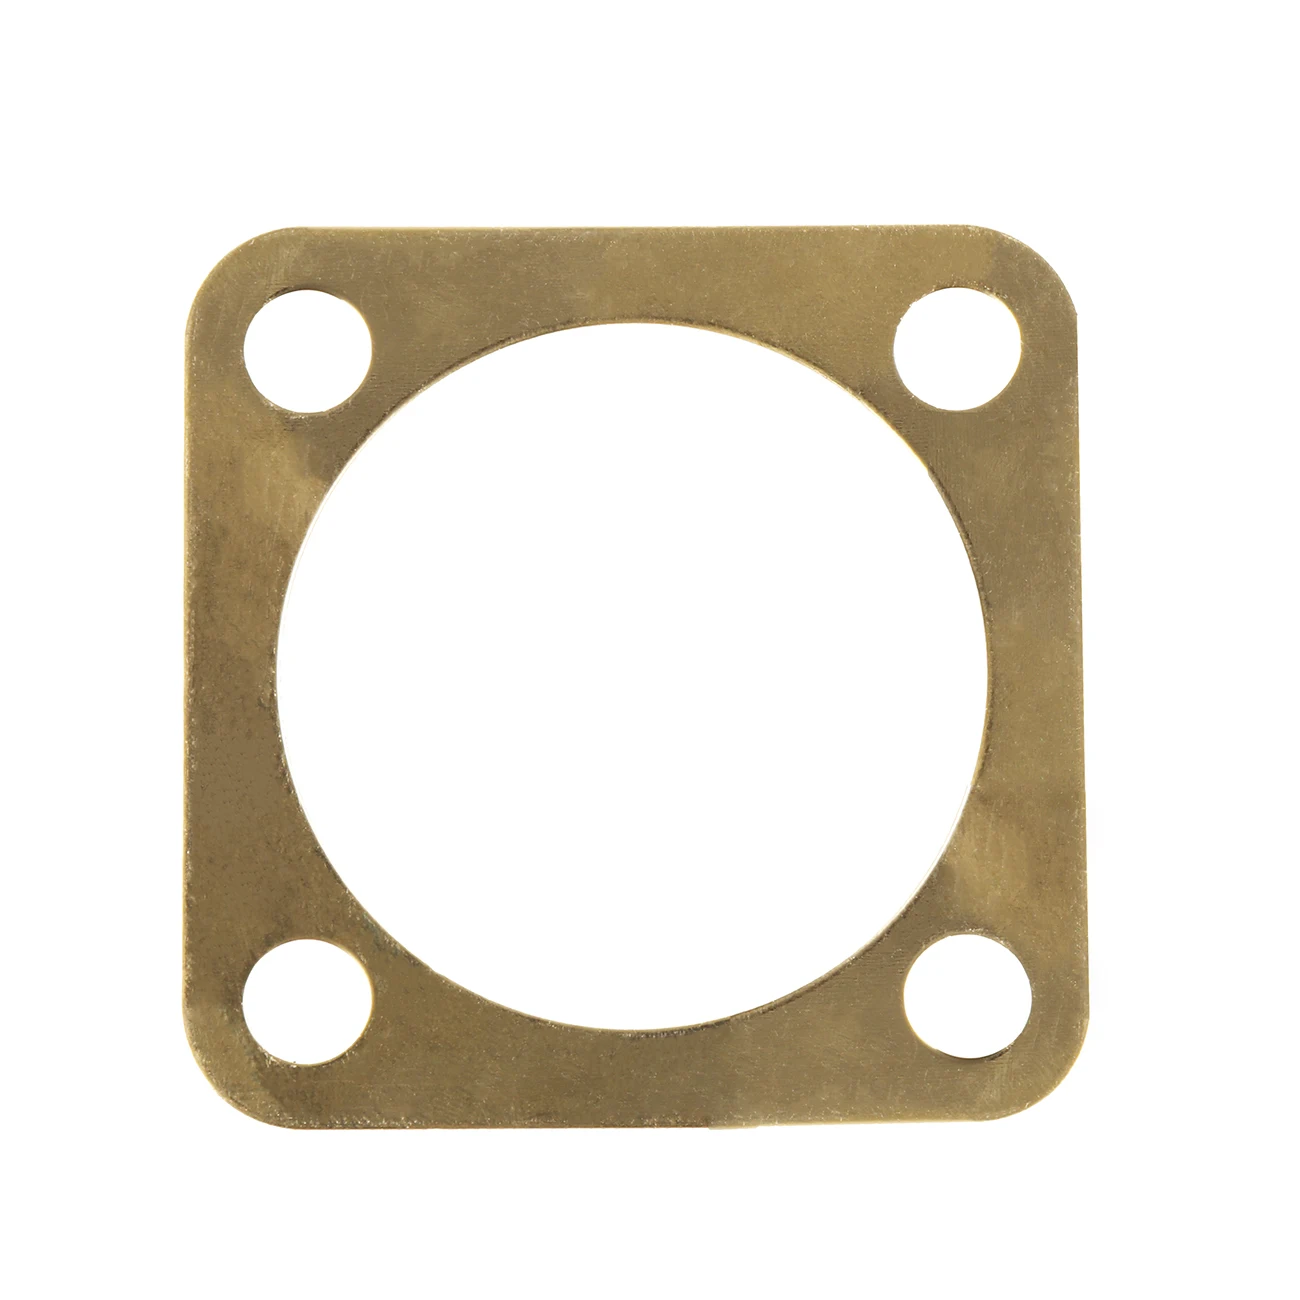 HEAD GASKET 2-Stroke 66cc for Motorized Bicycle SOLID COPPER HEAD GASKET RACING 